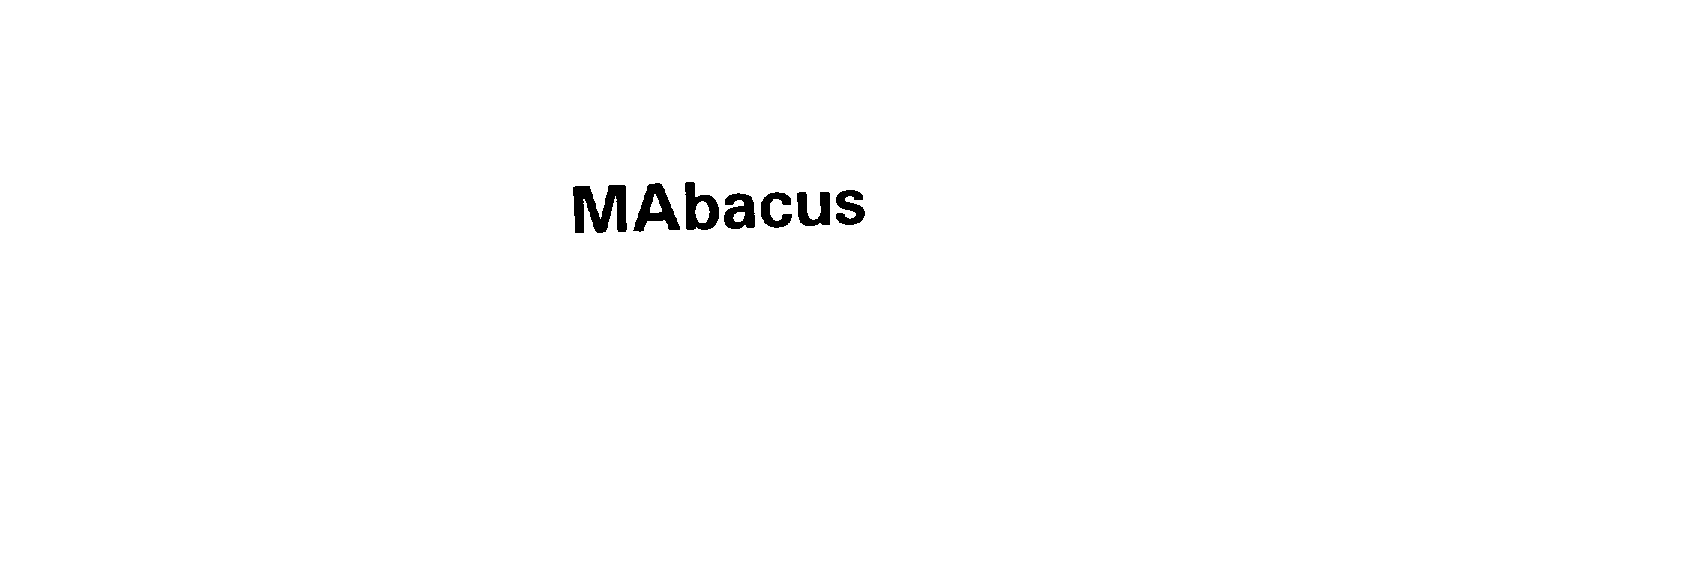  MABACUS